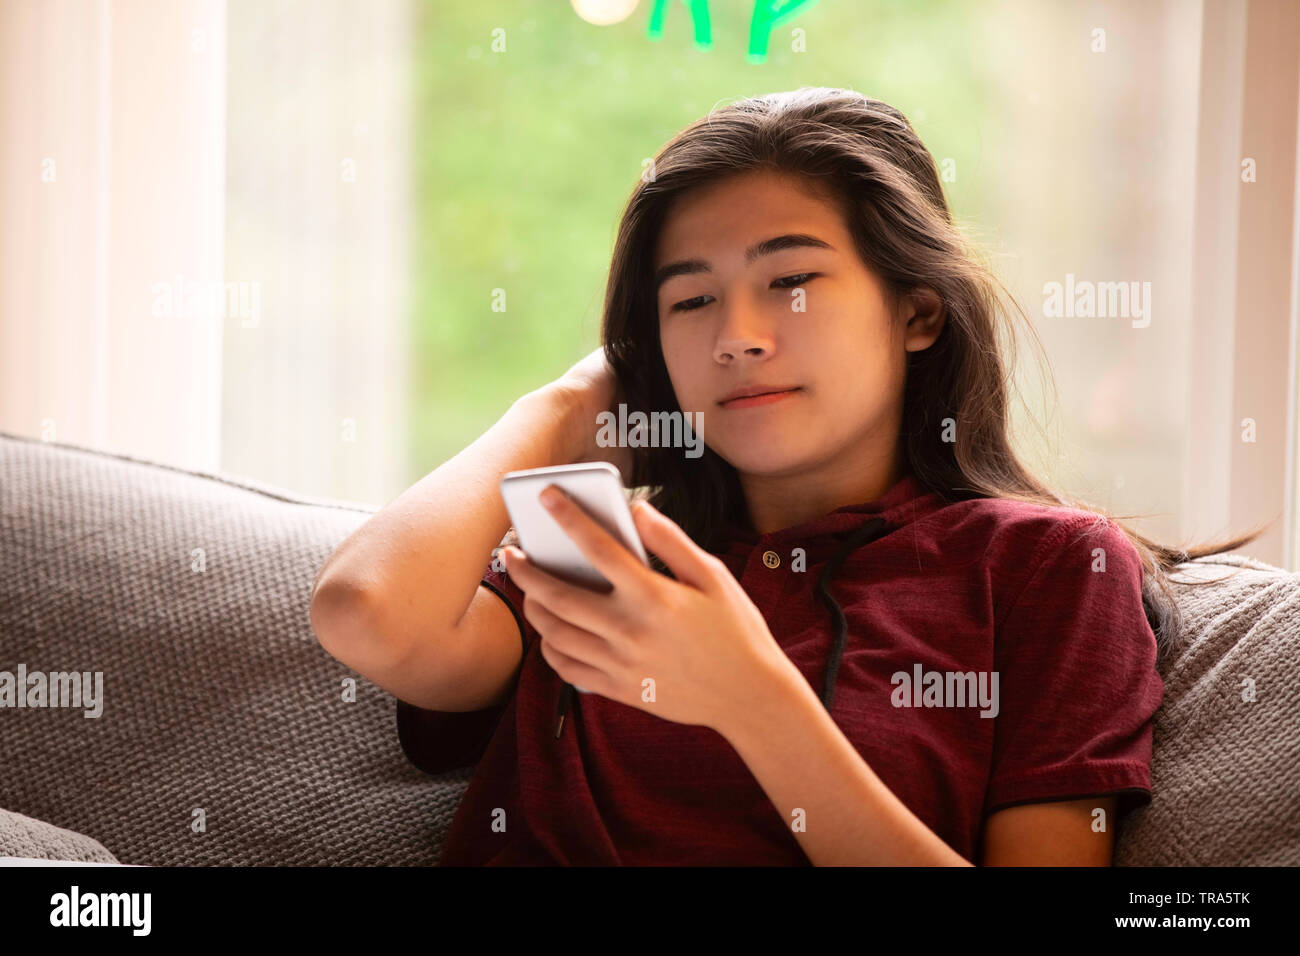 Biracial teen girl sitting on gray couch by large picture window, looking at smartphone Stock Photo